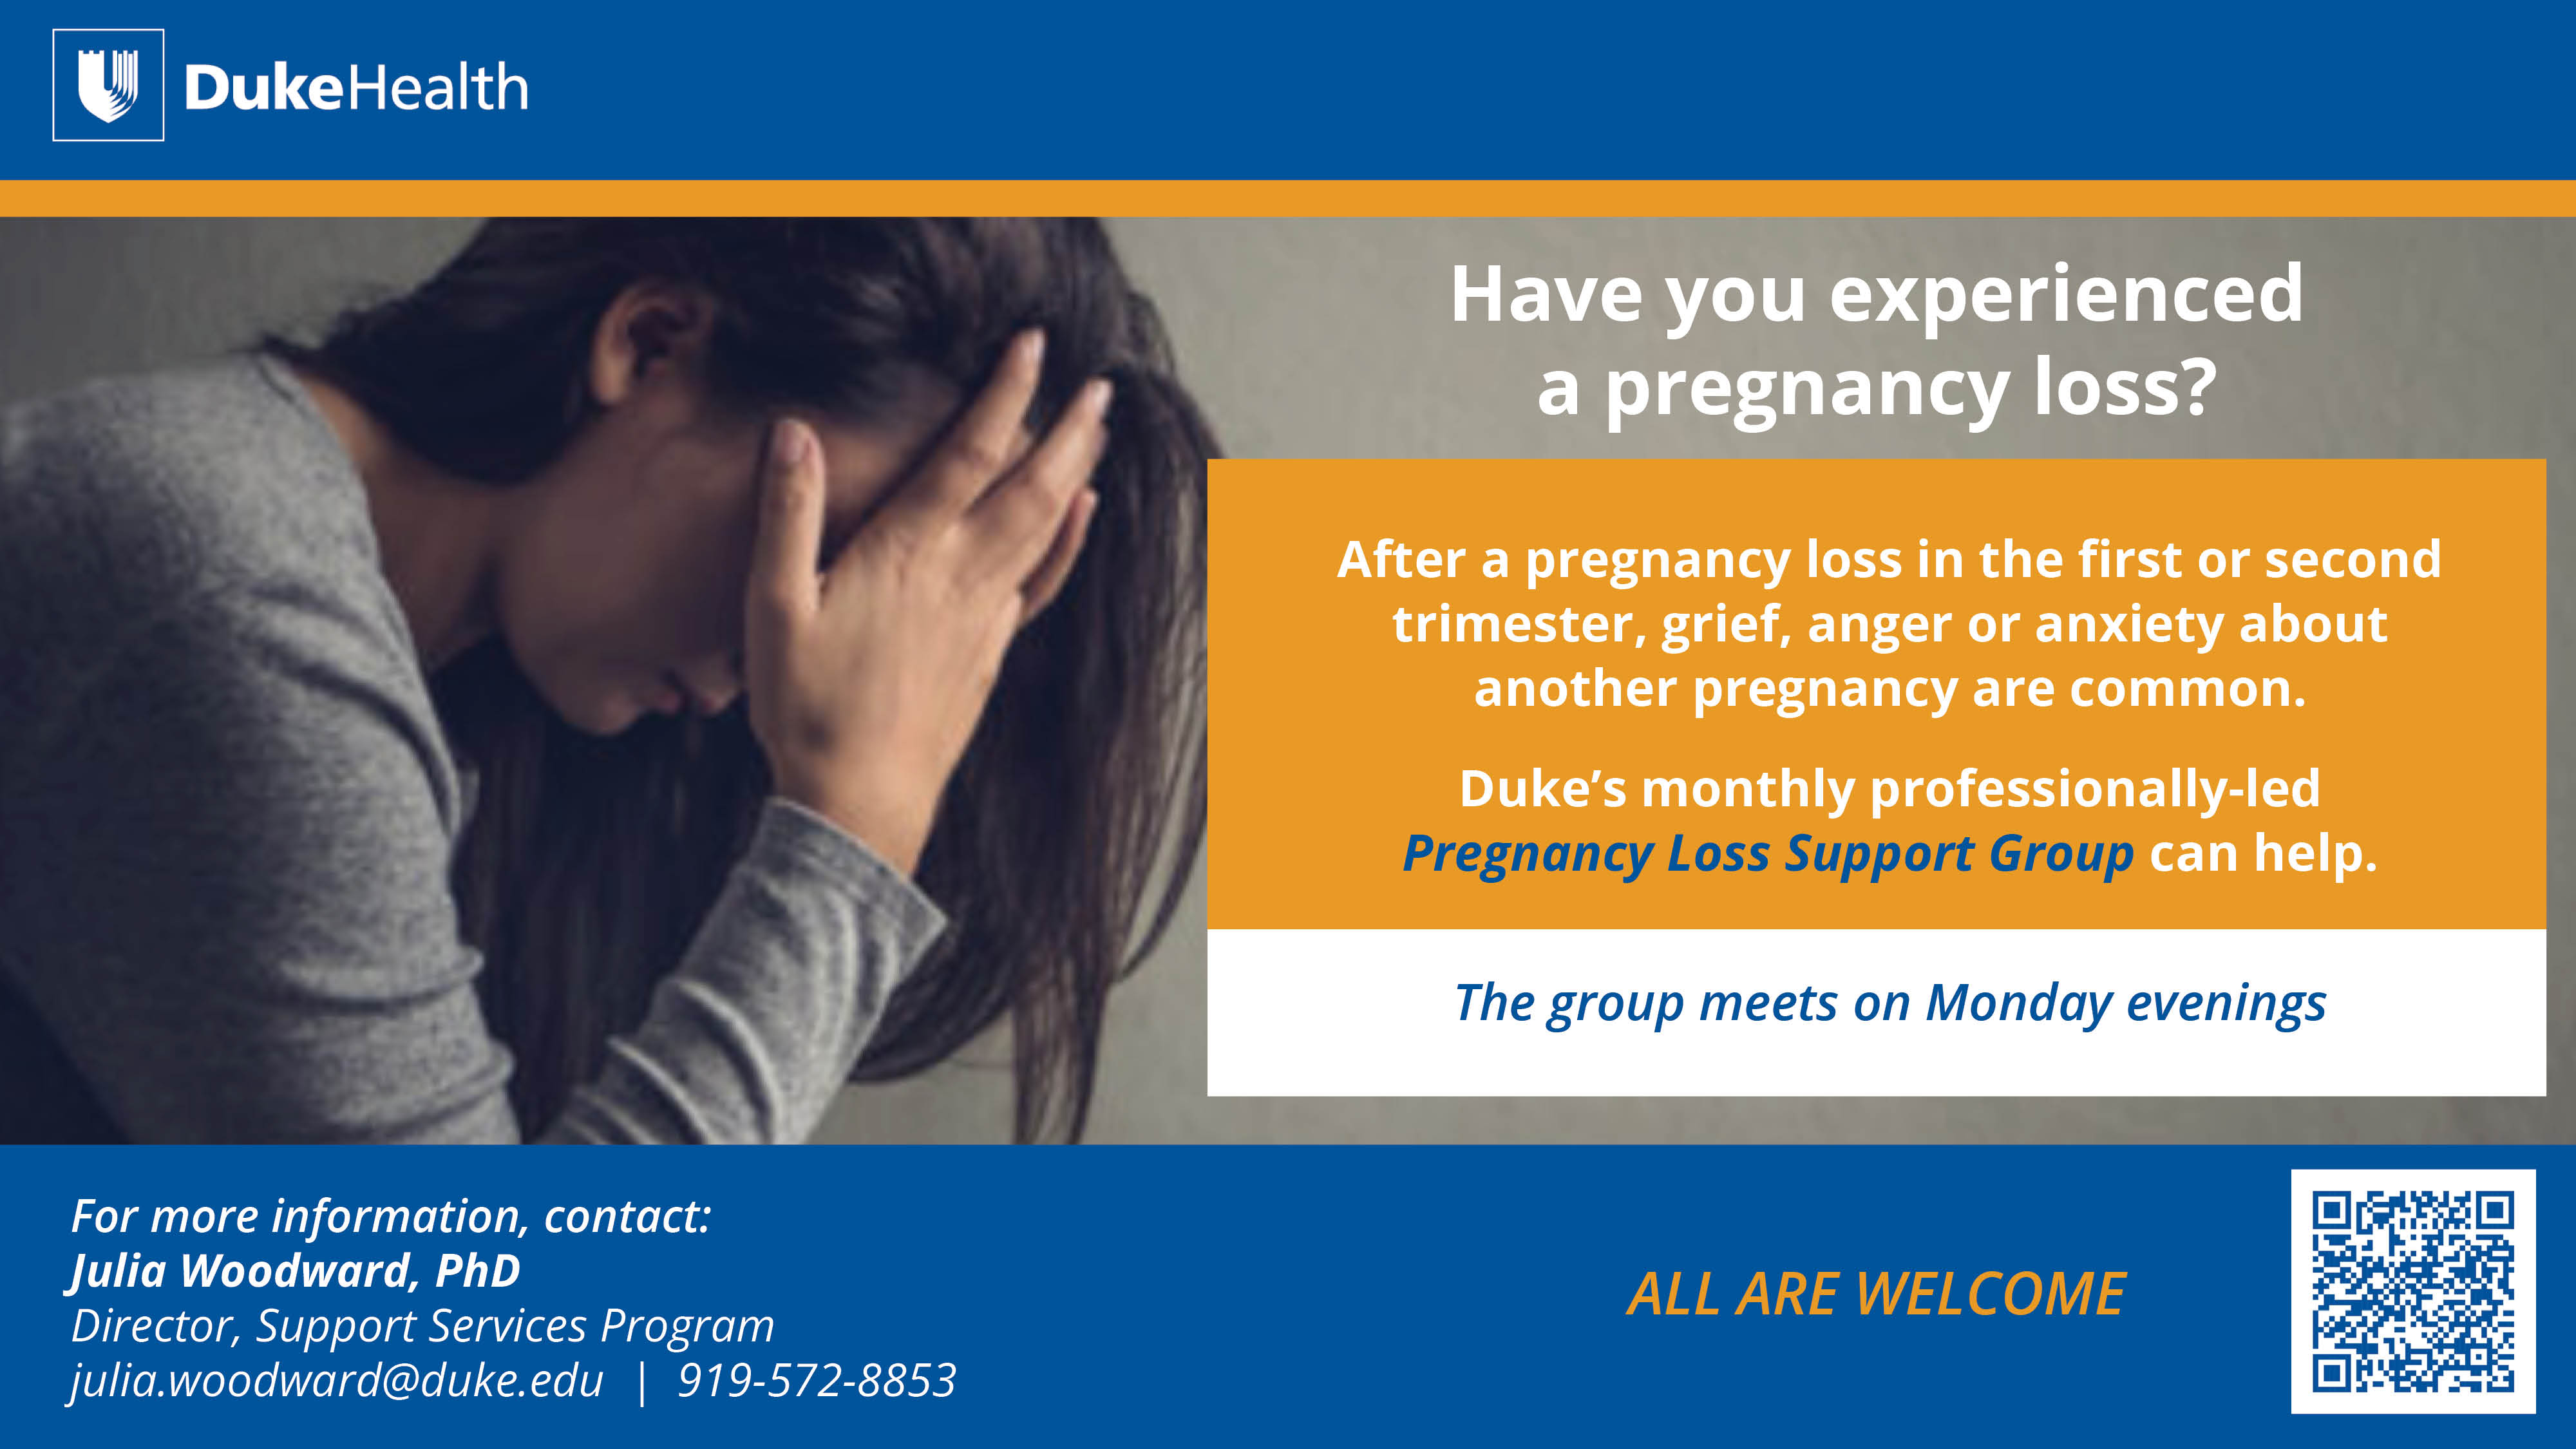 Pregnancy Loss Support Group - Full image text provided below